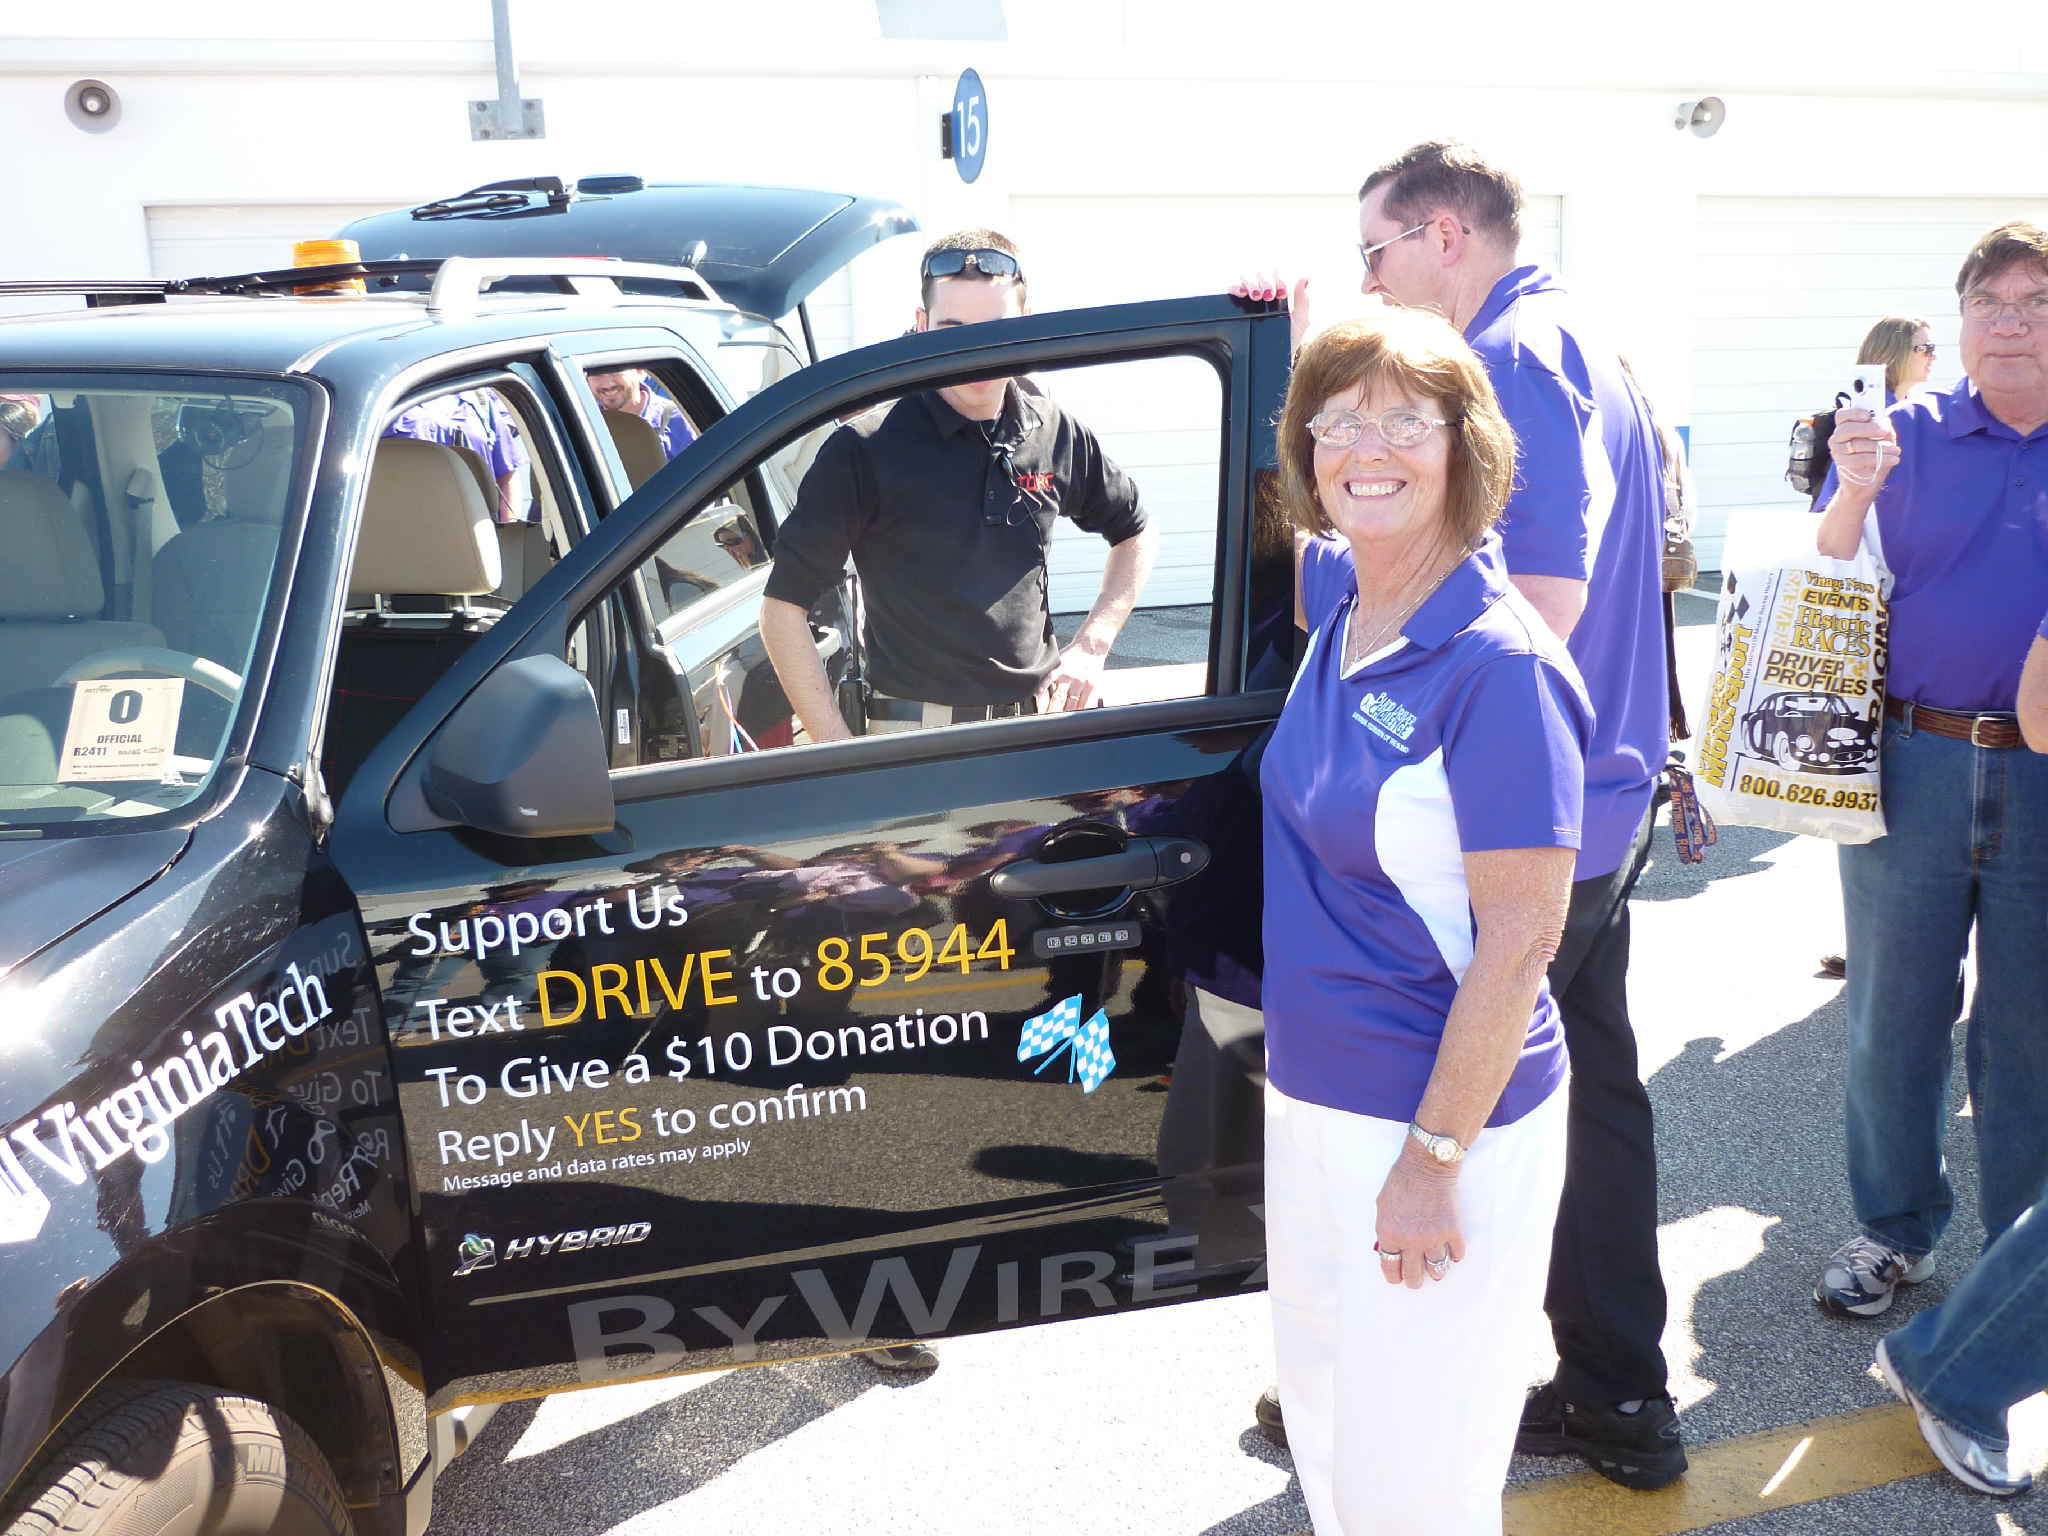 Cathy Jackson holding the door of an SUV challenge vehicle